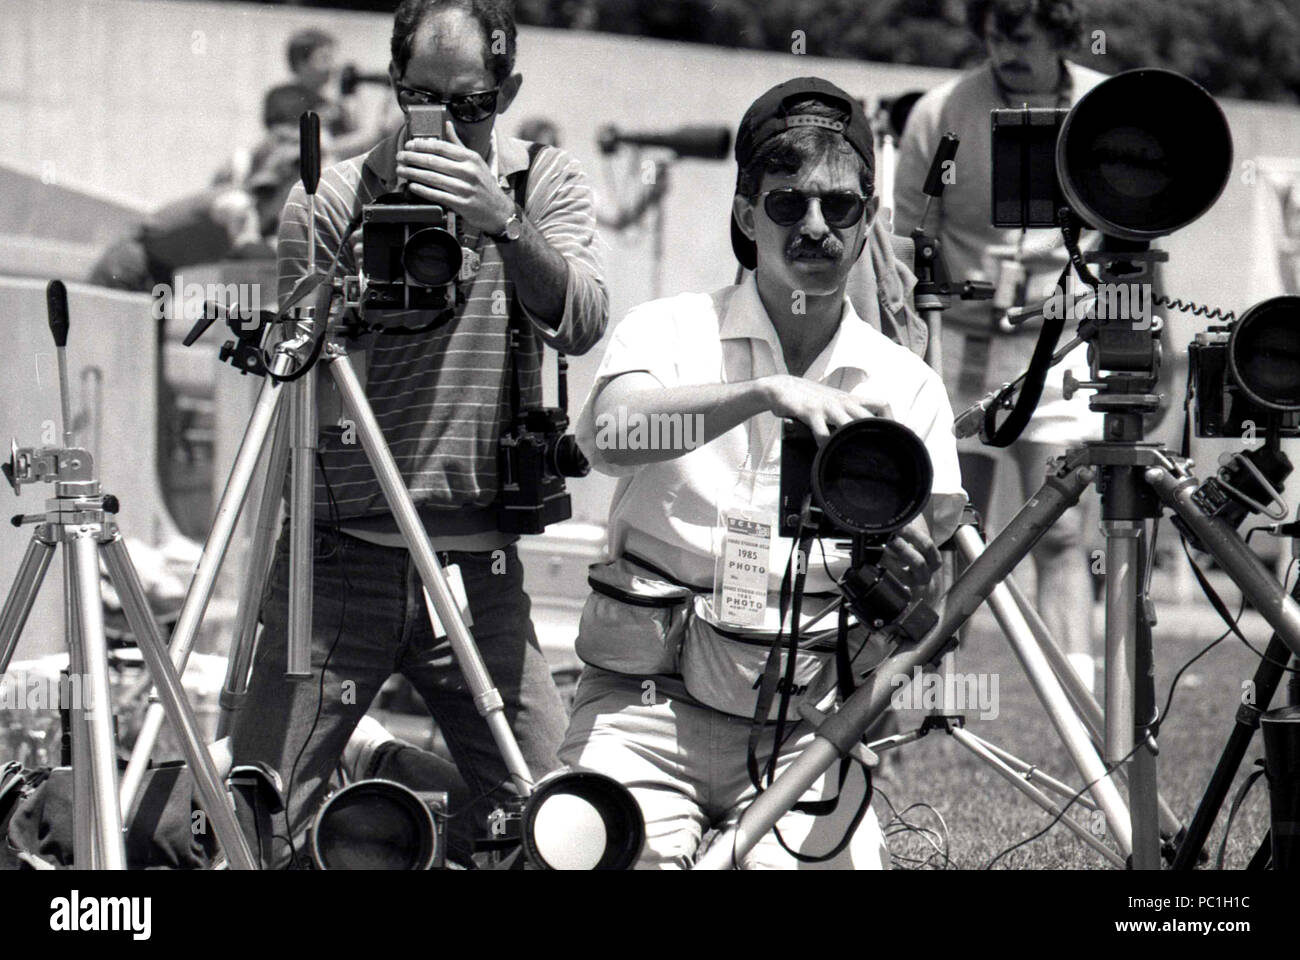 Photojournalists setting up their cameras during sports event, 1990s Stock Photo